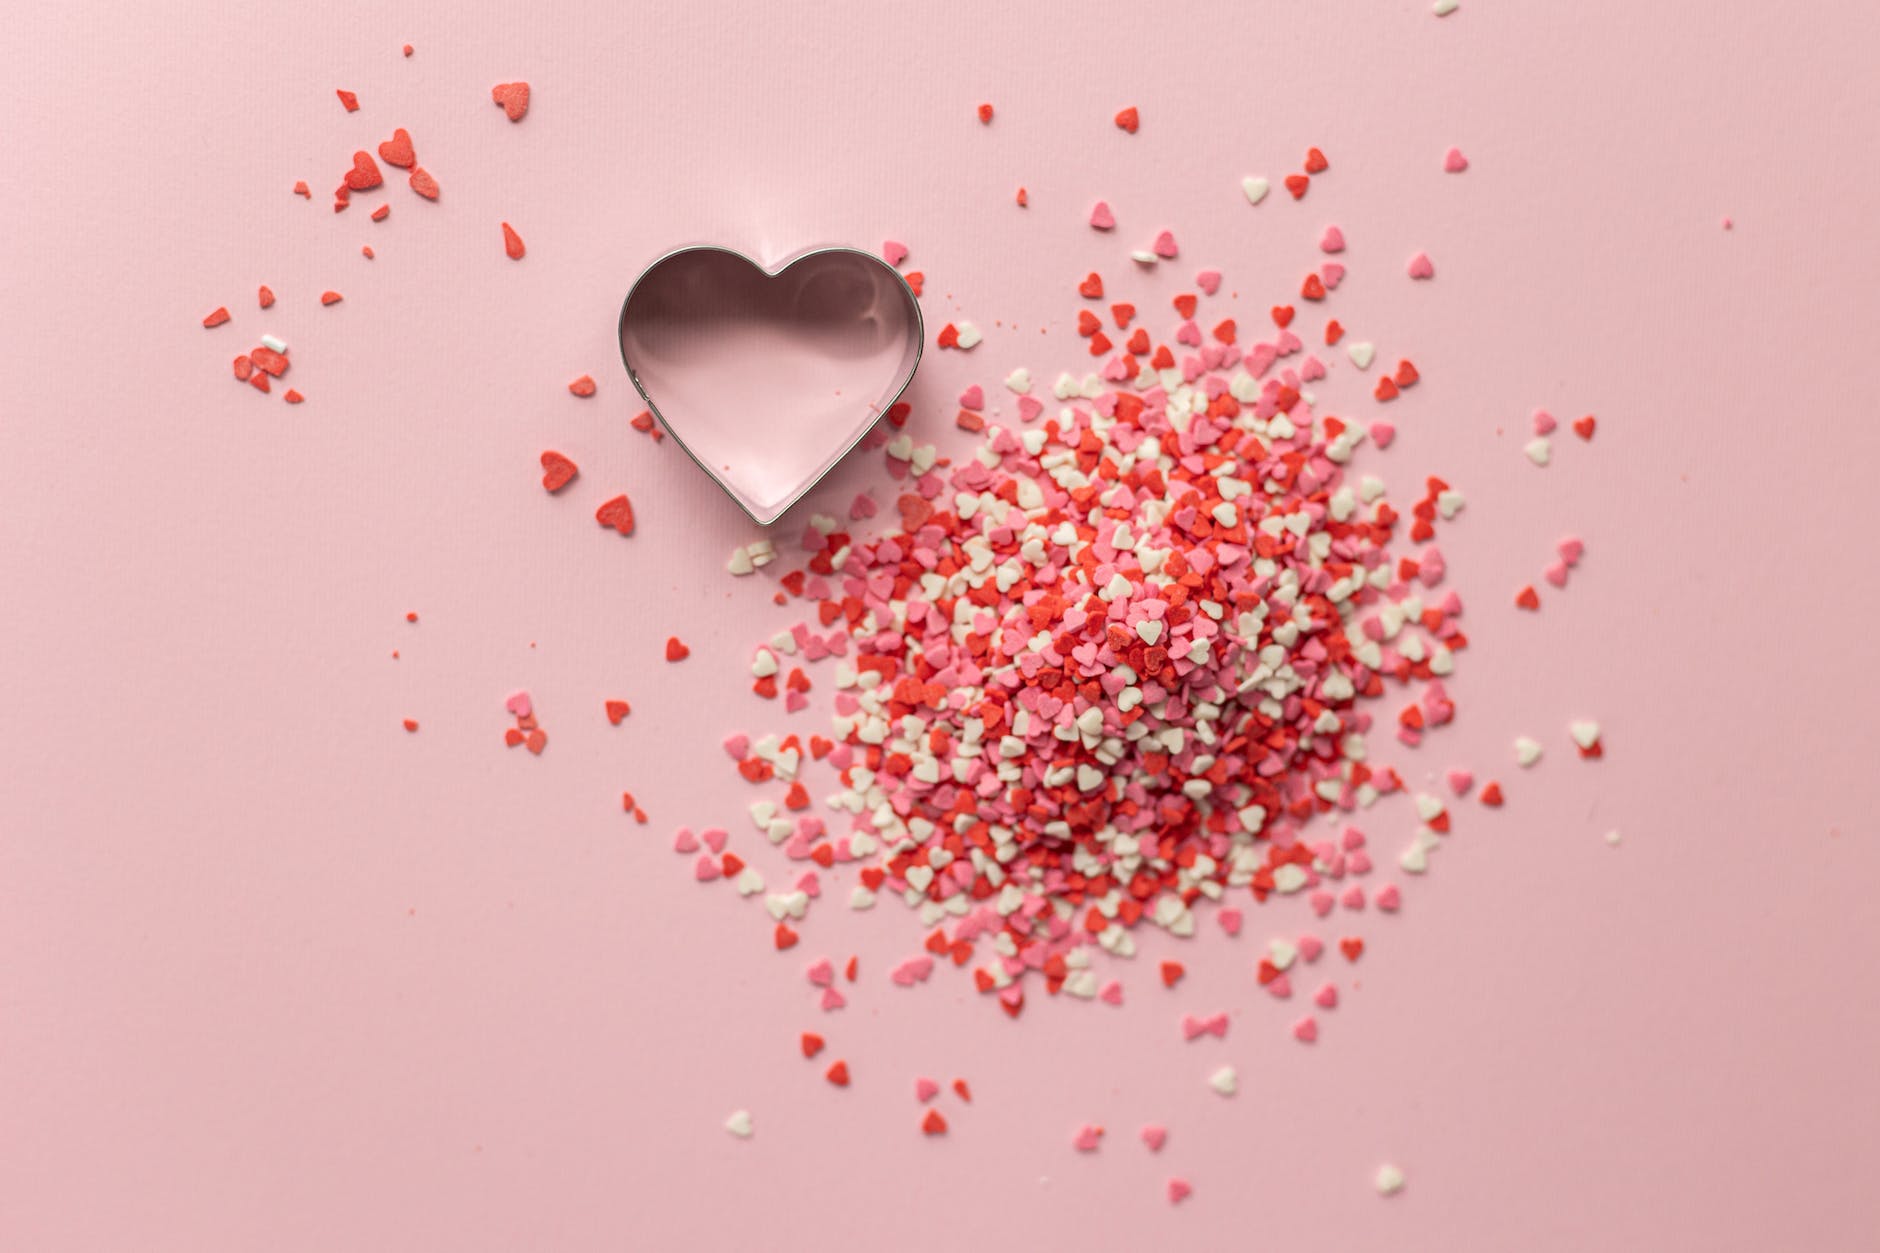 confetti near heart shaped baking tin on surface for valentine day